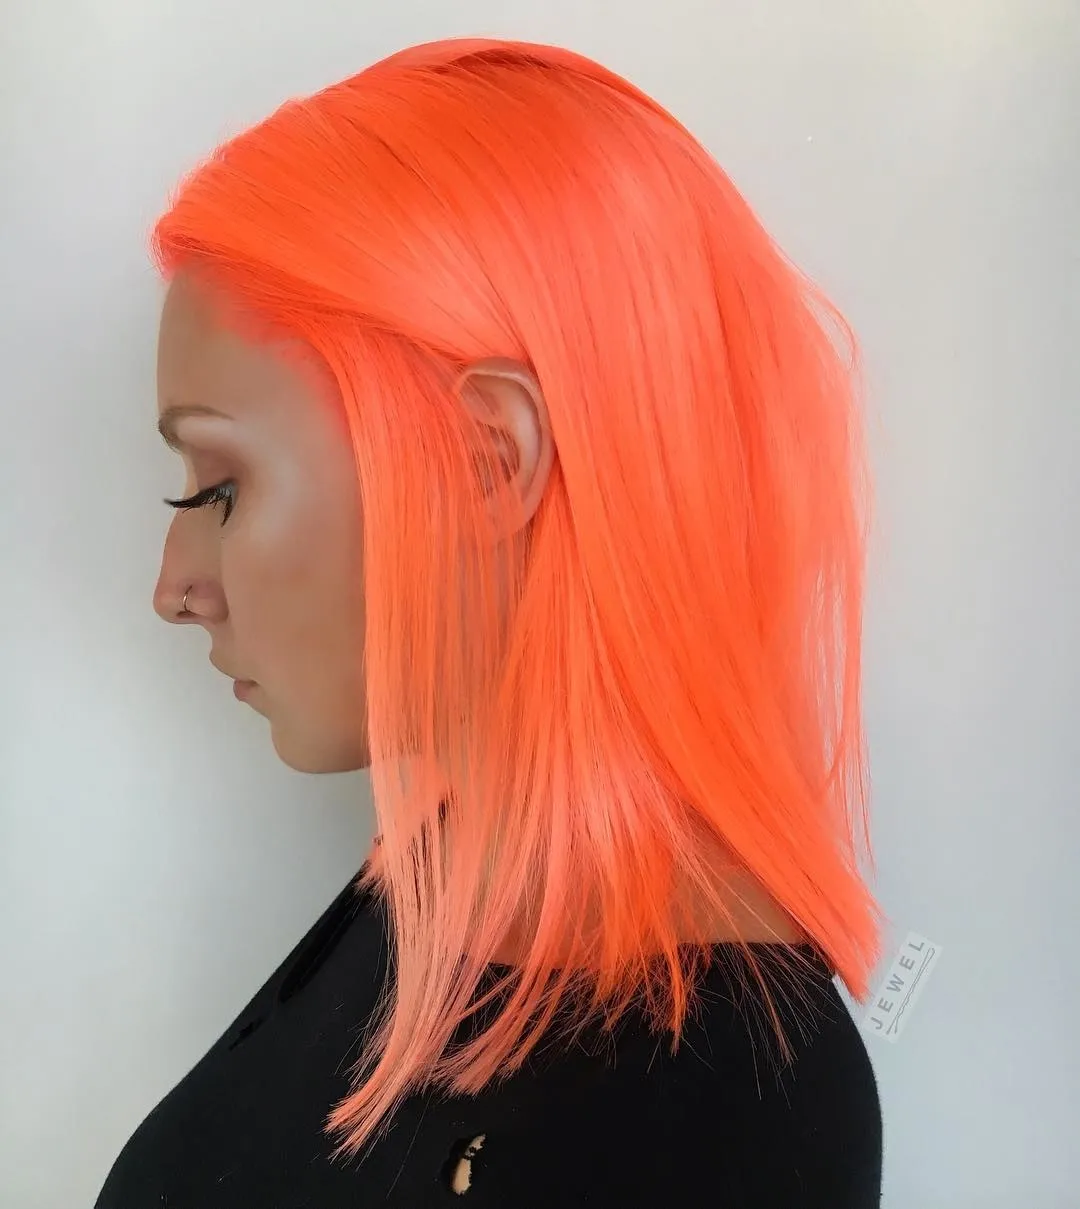 Hair Dye Ideas: Picture of a girl wearing neon color hair